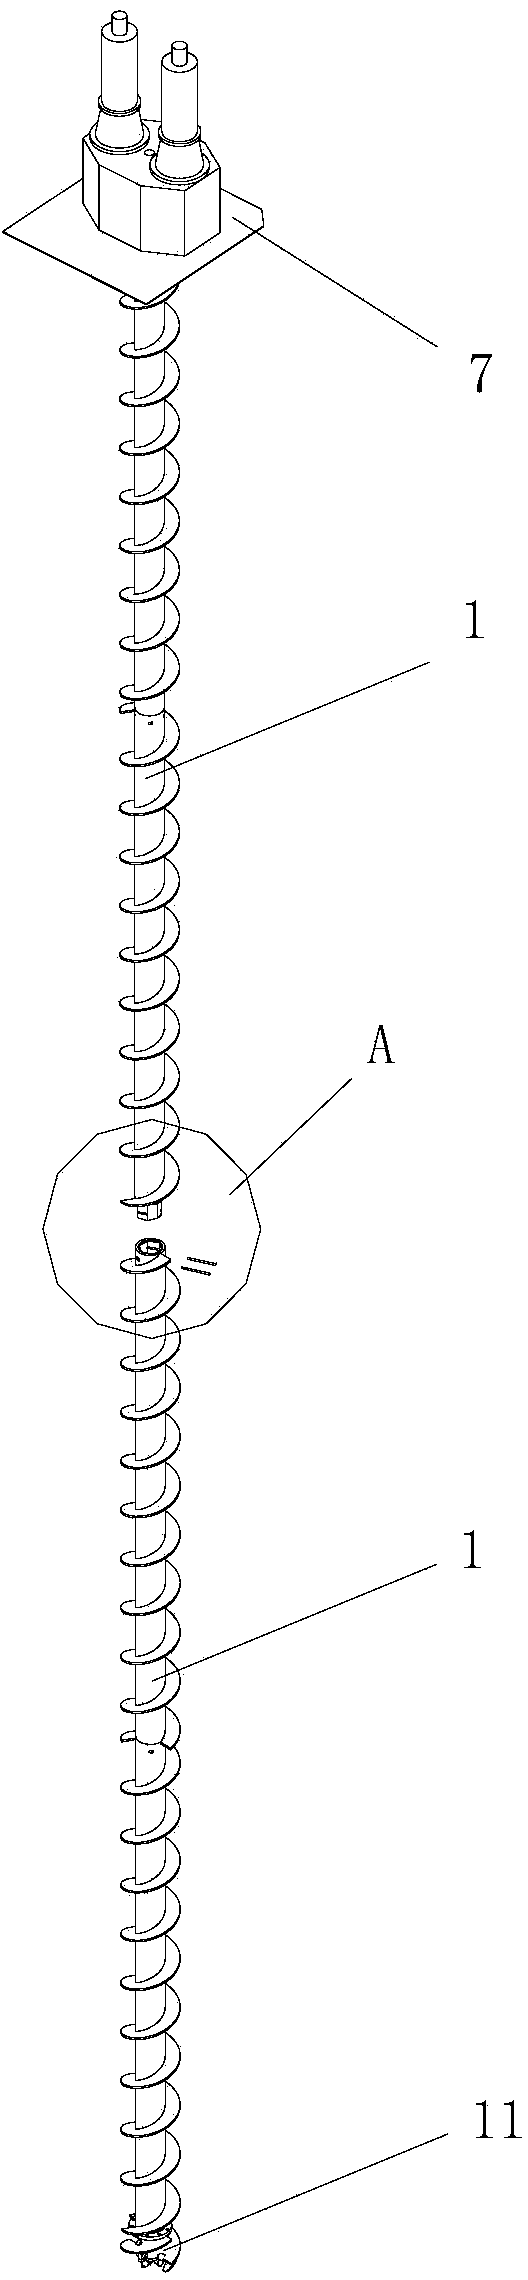 Construction technology for long-spiral cast-in-place pile extruded into rock